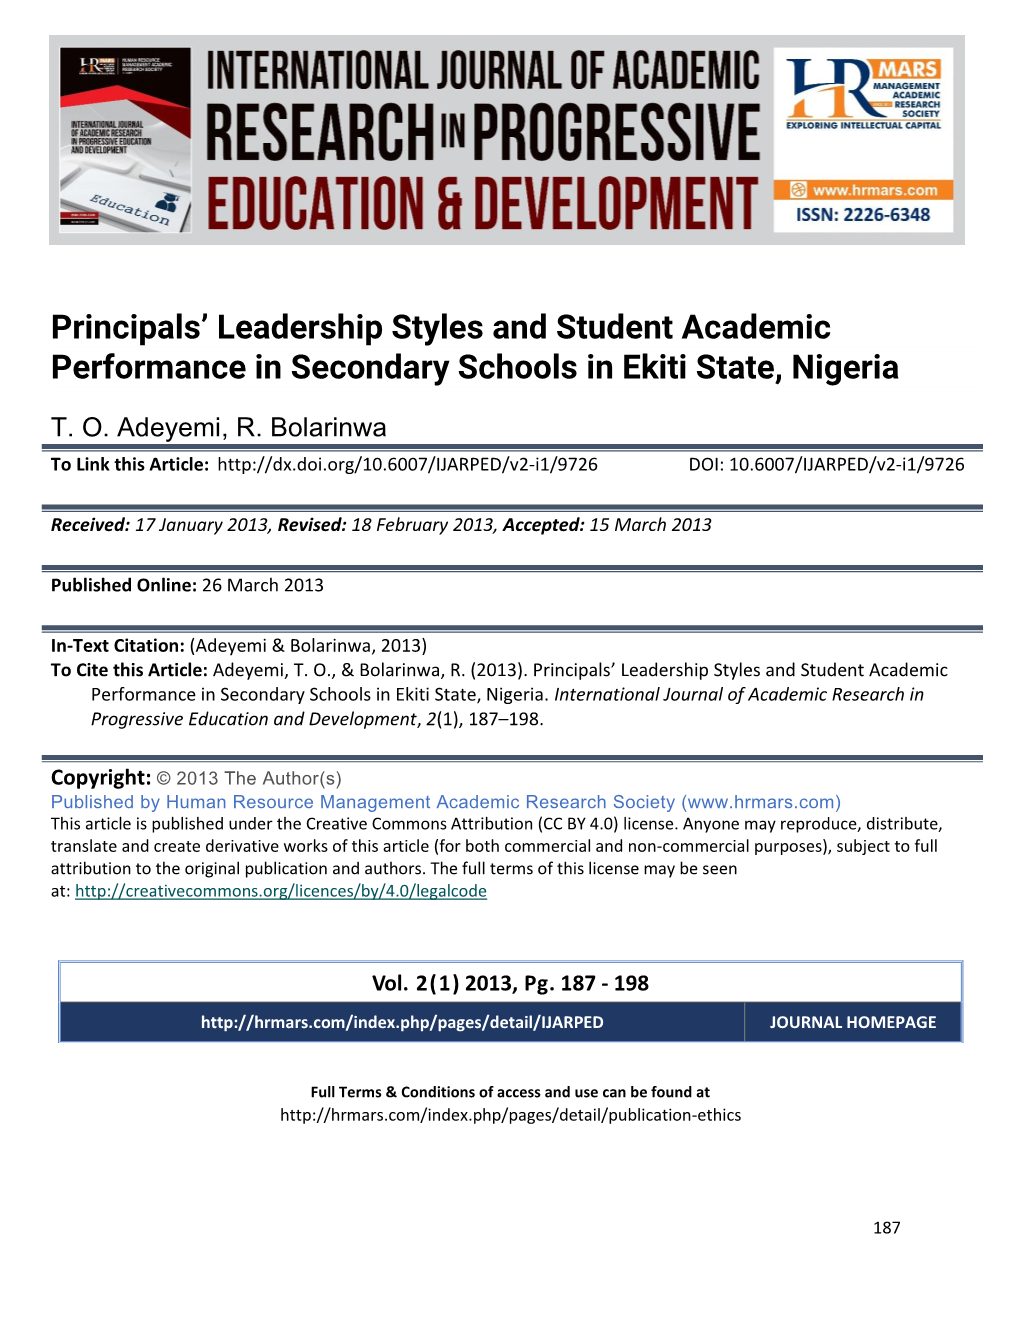 Principals' Leadership Styles and Student Academic Performance In